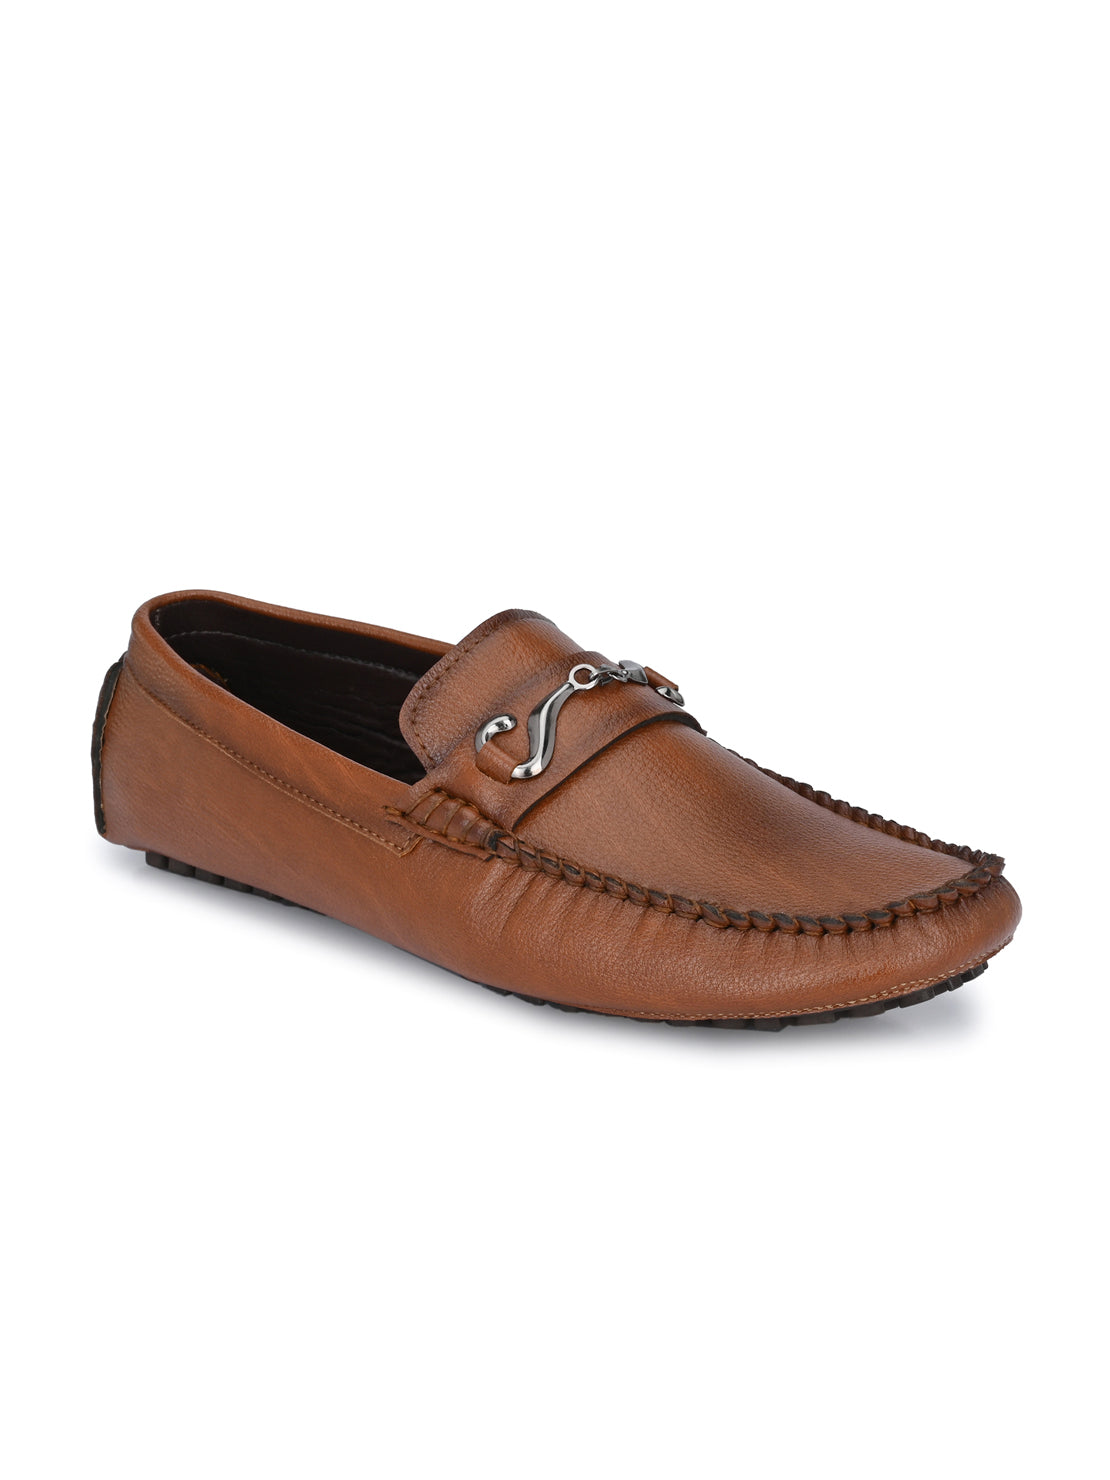 Guava Men's Tan Casual Slip On Driving Loafers (GV15JA771)